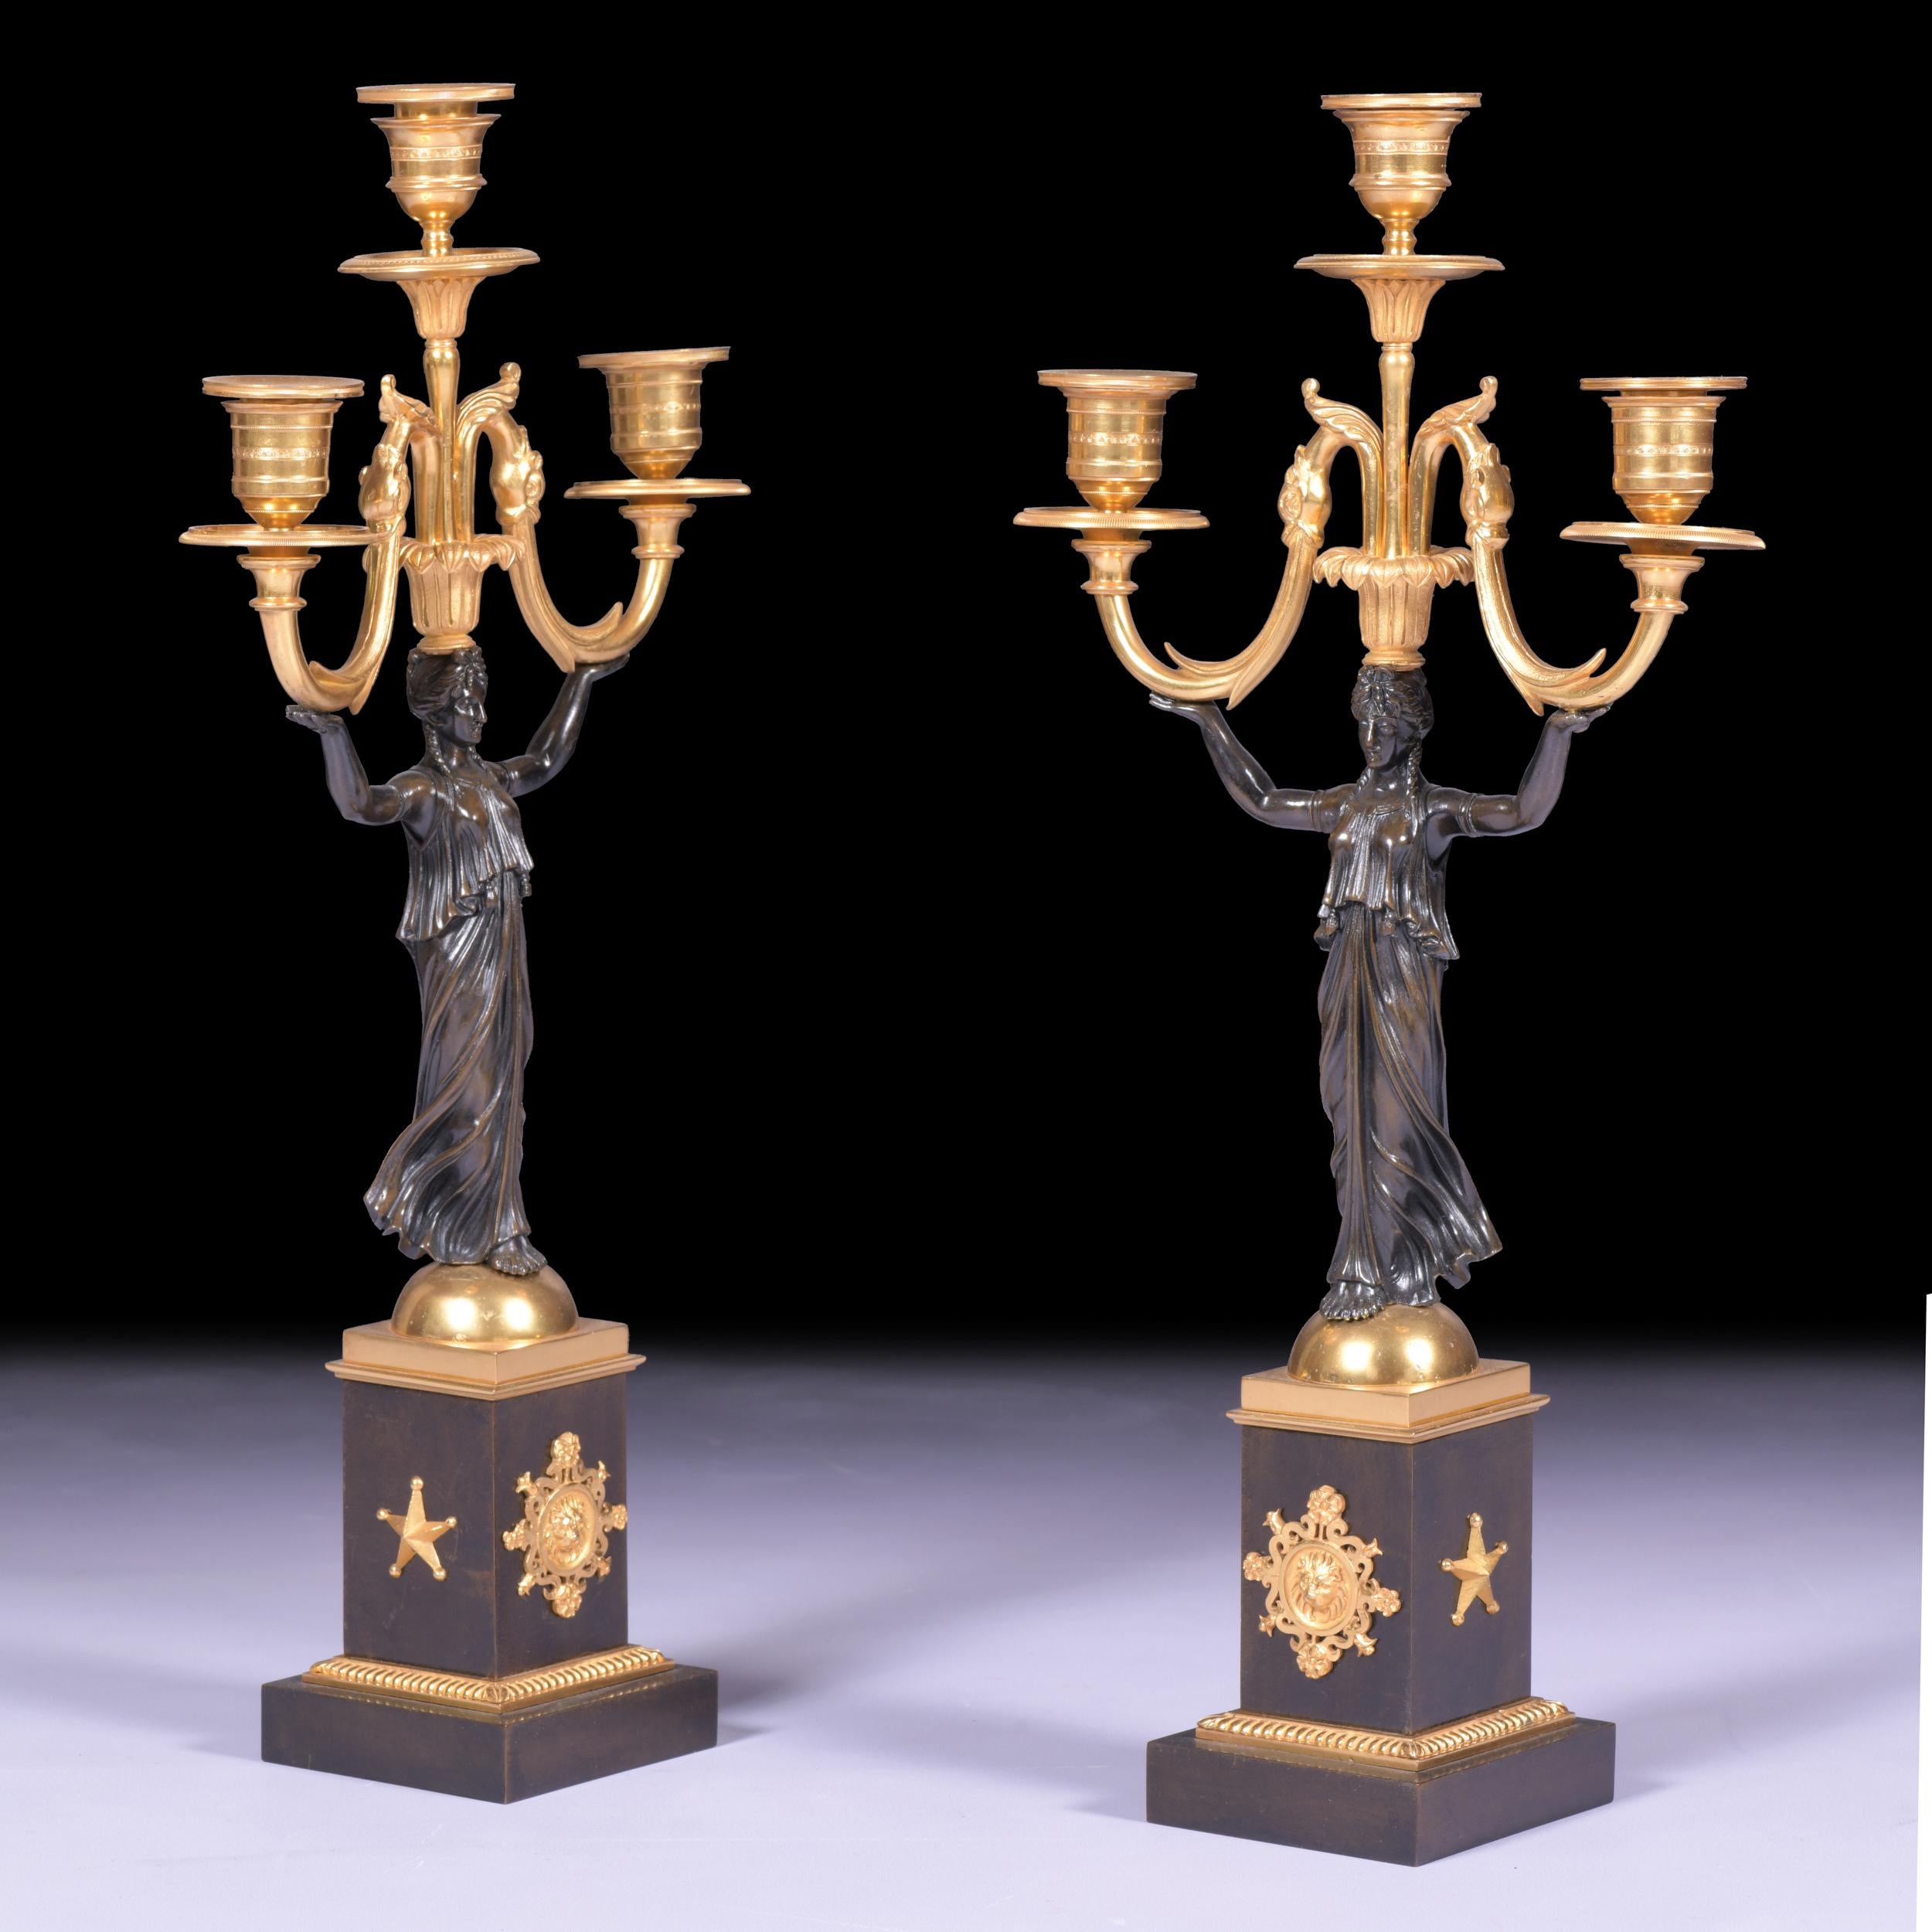 A stunning pair of French 19th Neoclassical style patinated bronze and ormolu 3 light candelabra. Each candelabra is raised by a square base with ormolu supports and foliate designs below a beaded band. The patinated base with richly chased pierced